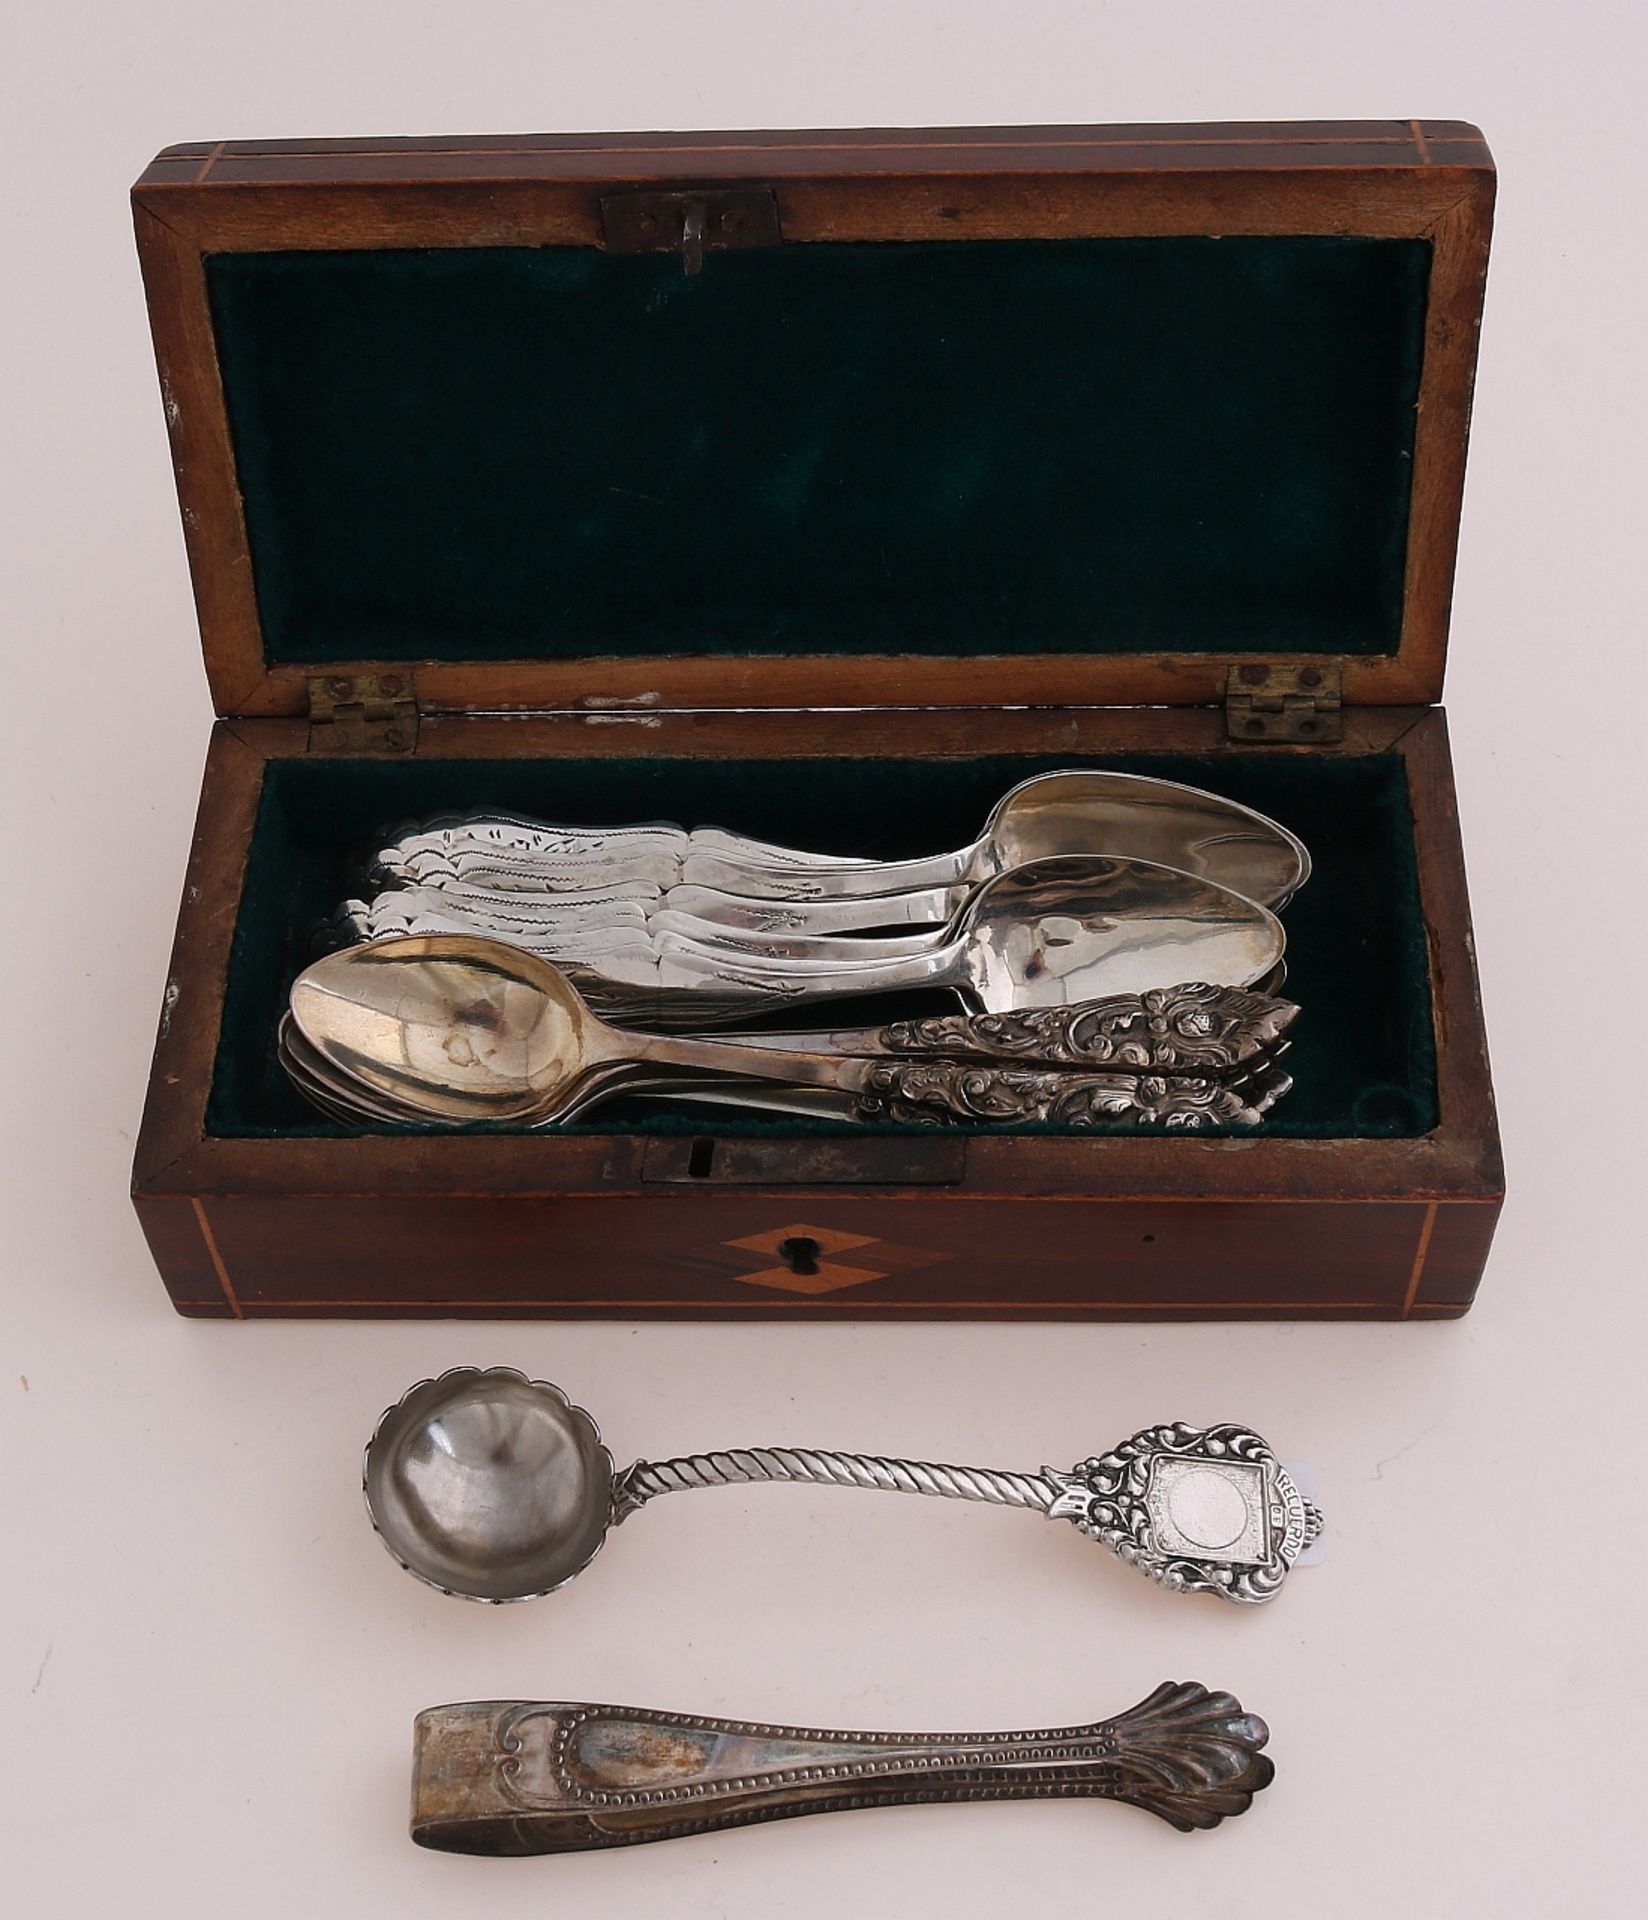 Spoon box with silver spoons